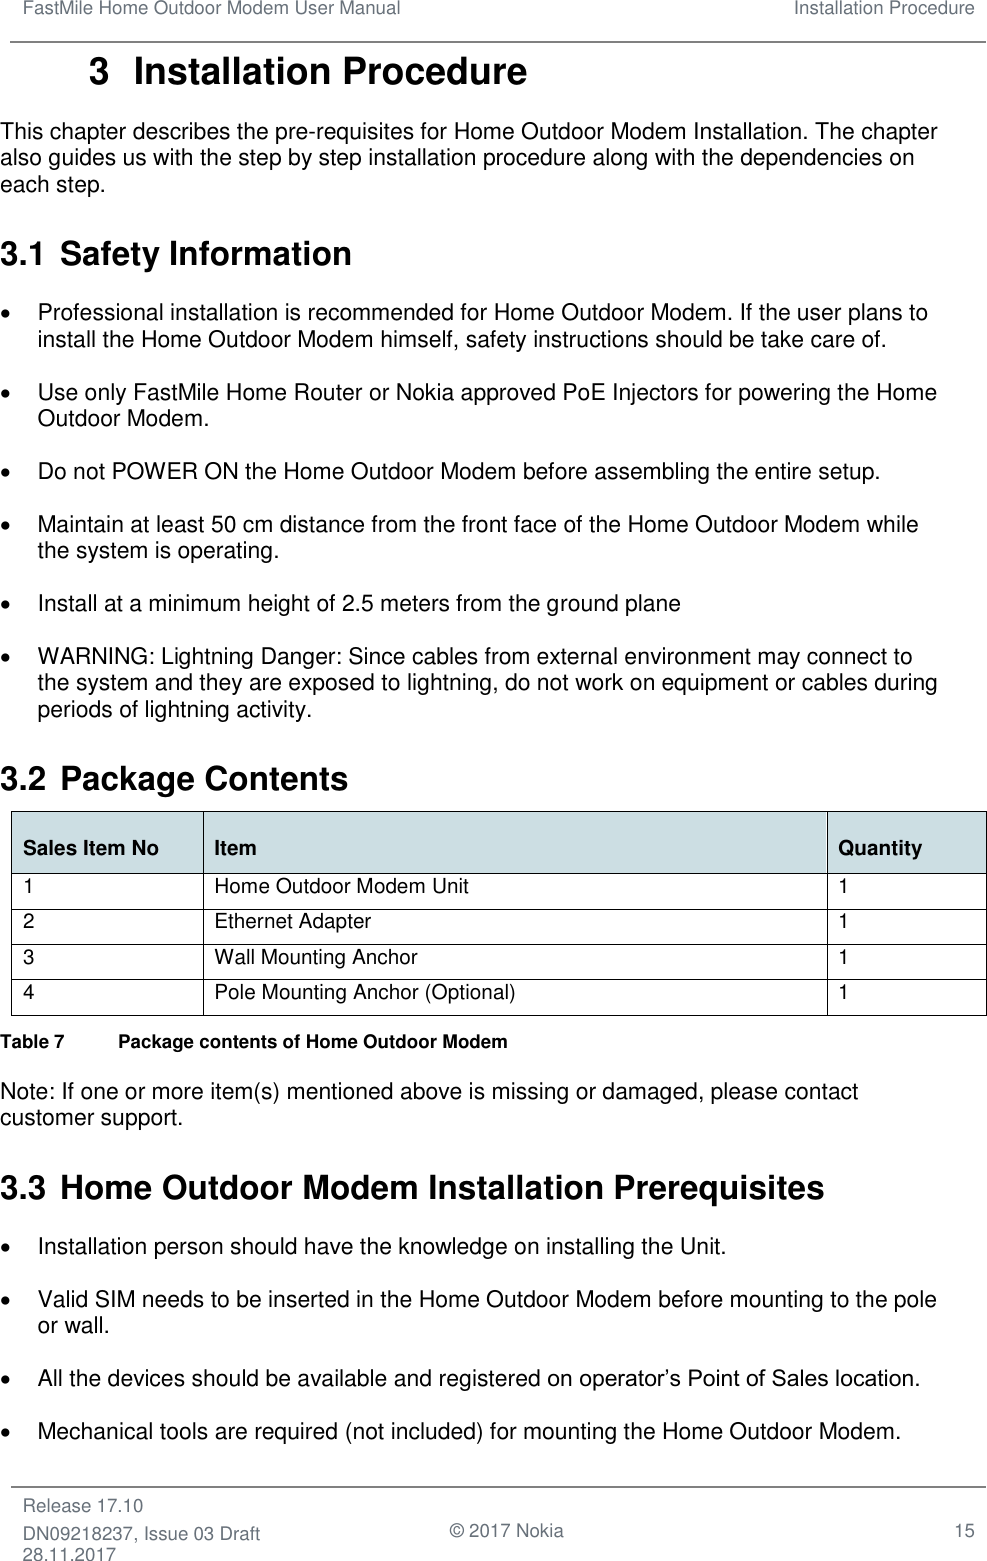 FastMile Home Outdoor Modem User Manual Installation Procedure  Release 17.10 DN09218237, Issue 03 Draft 28.11.2017                                © 2017 Nokia 15  3  Installation Procedure This chapter describes the pre-requisites for Home Outdoor Modem Installation. The chapter also guides us with the step by step installation procedure along with the dependencies on each step. 3.1 Safety Information •  Professional installation is recommended for Home Outdoor Modem. If the user plans to install the Home Outdoor Modem himself, safety instructions should be take care of. •  Use only FastMile Home Router or Nokia approved PoE Injectors for powering the Home Outdoor Modem.  •  Do not POWER ON the Home Outdoor Modem before assembling the entire setup. •  Maintain at least 50 cm distance from the front face of the Home Outdoor Modem while the system is operating.  •  Install at a minimum height of 2.5 meters from the ground plane •  WARNING: Lightning Danger: Since cables from external environment may connect to the system and they are exposed to lightning, do not work on equipment or cables during periods of lightning activity. 3.2 Package Contents Sales Item No Item Quantity 1 Home Outdoor Modem Unit 1 2 Ethernet Adapter 1 3 Wall Mounting Anchor 1 4 Pole Mounting Anchor (Optional) 1 Table 7  Package contents of Home Outdoor Modem Note: If one or more item(s) mentioned above is missing or damaged, please contact customer support. 3.3 Home Outdoor Modem Installation Prerequisites •  Installation person should have the knowledge on installing the Unit. •  Valid SIM needs to be inserted in the Home Outdoor Modem before mounting to the pole or wall. •  All the devices should be available and registered on operator’s Point of Sales location. •  Mechanical tools are required (not included) for mounting the Home Outdoor Modem. 